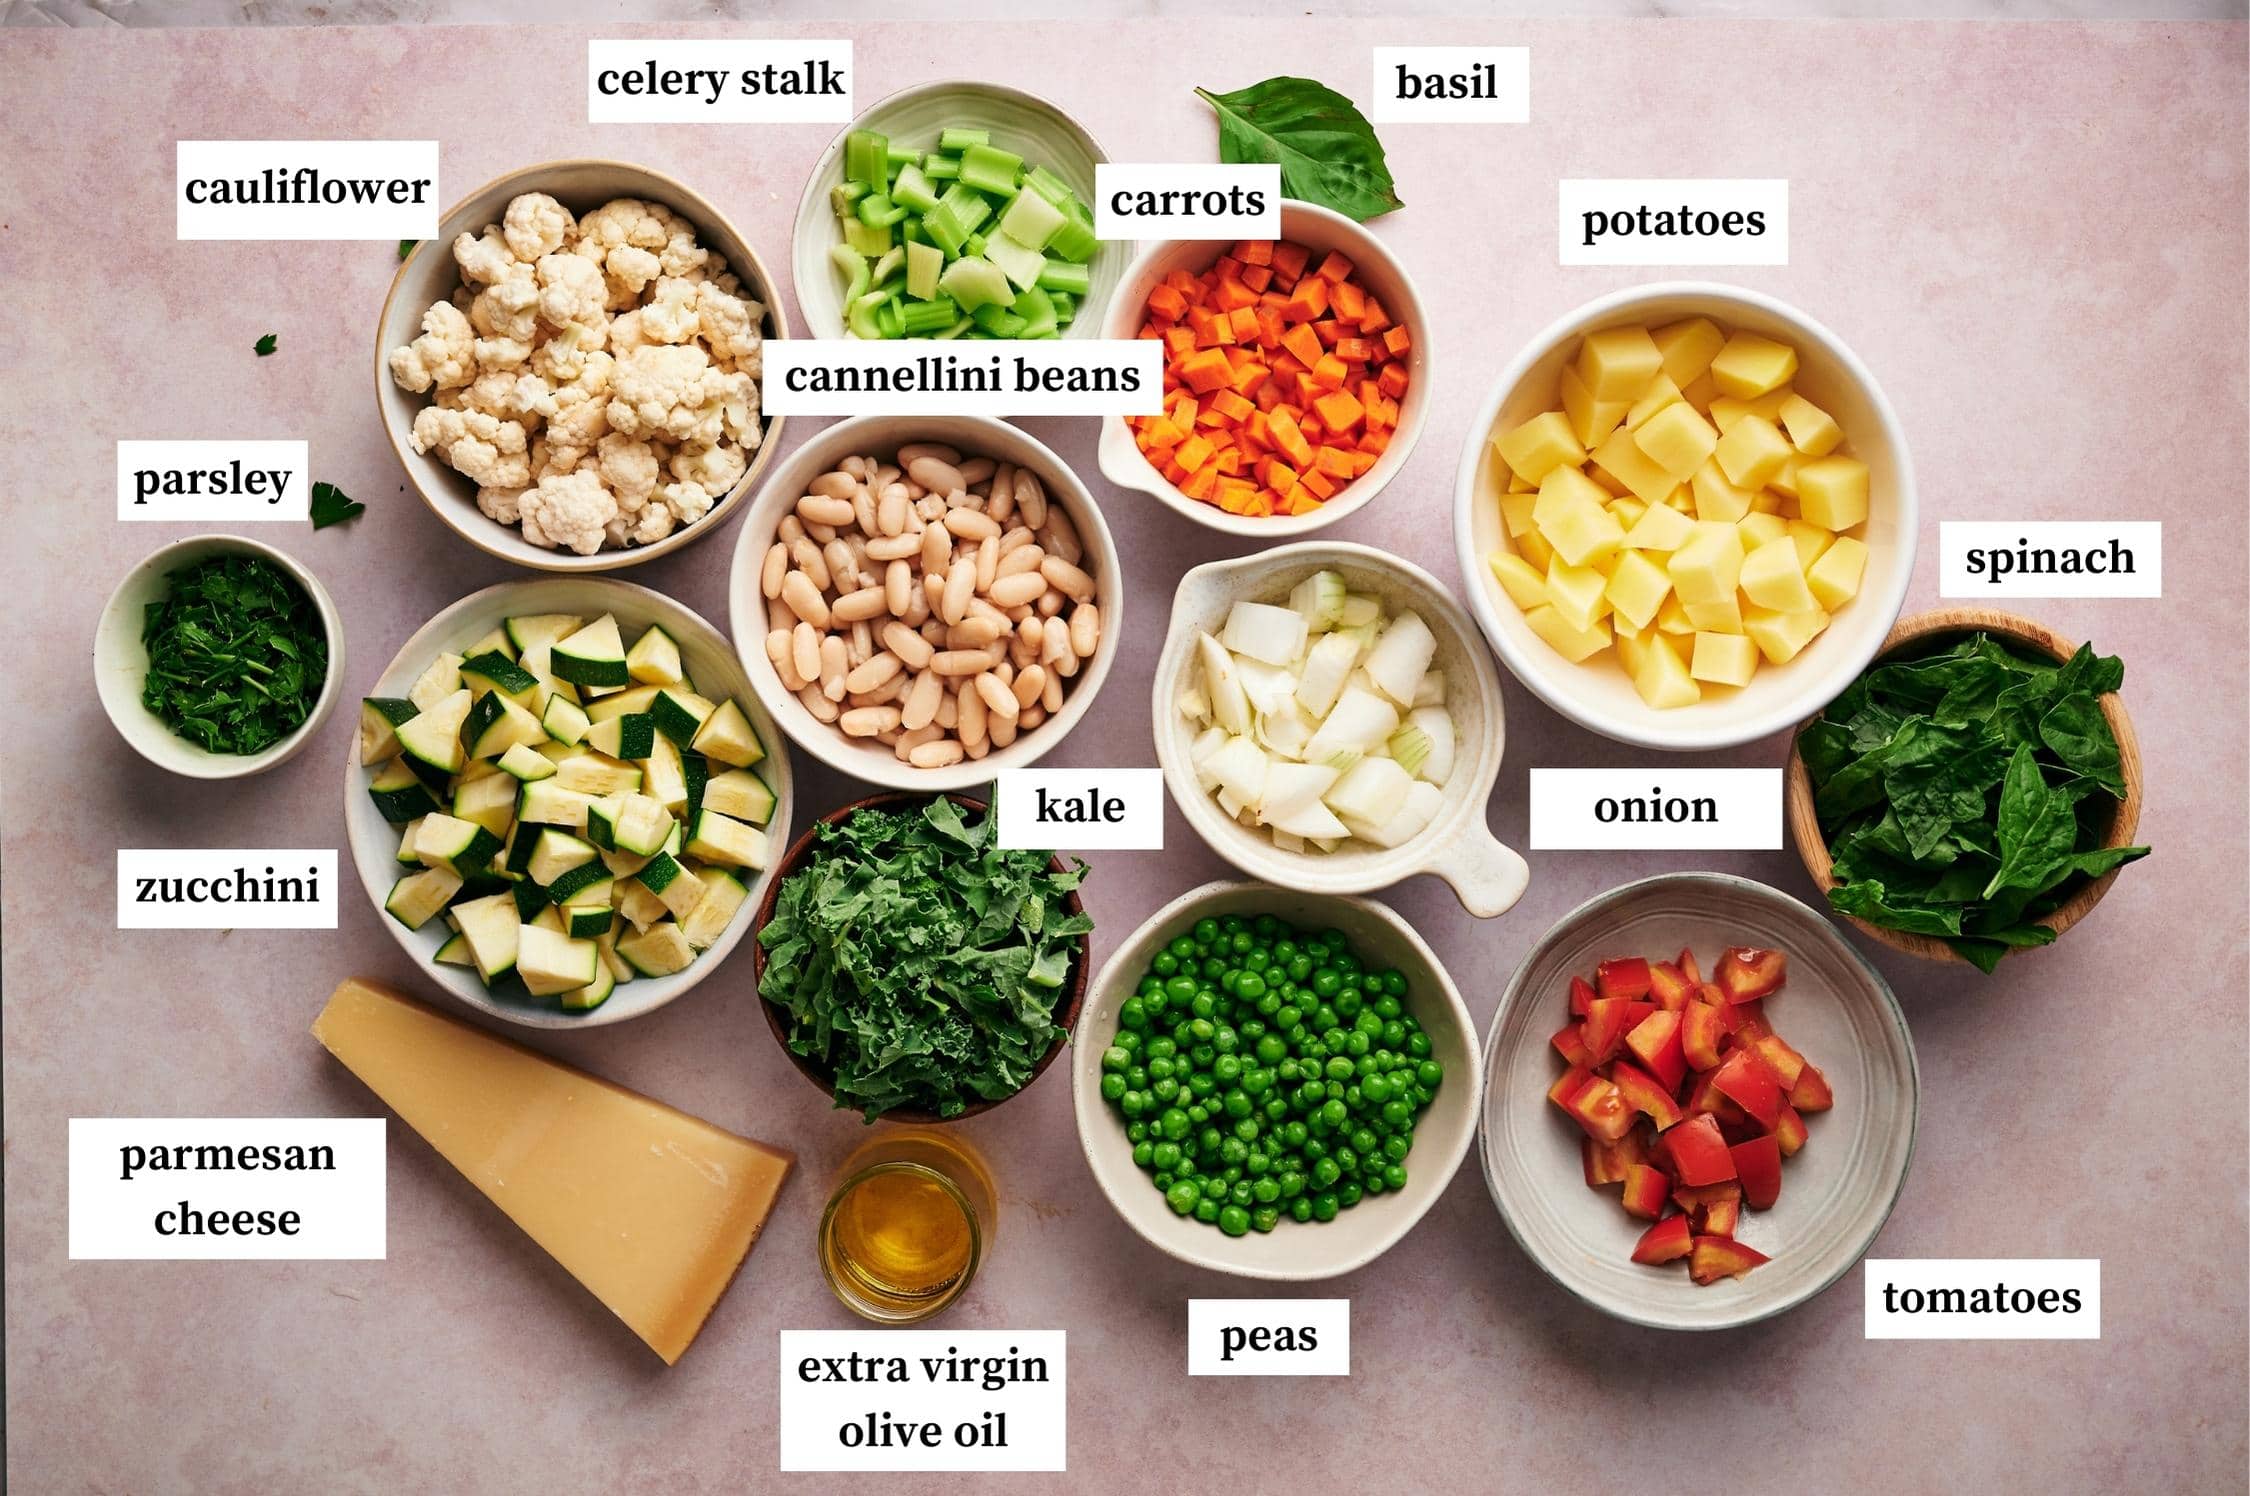 Ingredients for Minestrone soup: cauliflower, celeery stalk, carrots, basil, potatoes, spinach, onion, tomatoes, peas, kale, extra virgin olive oil, cannellini beans, parmesan cheese, zucchini and parsley.